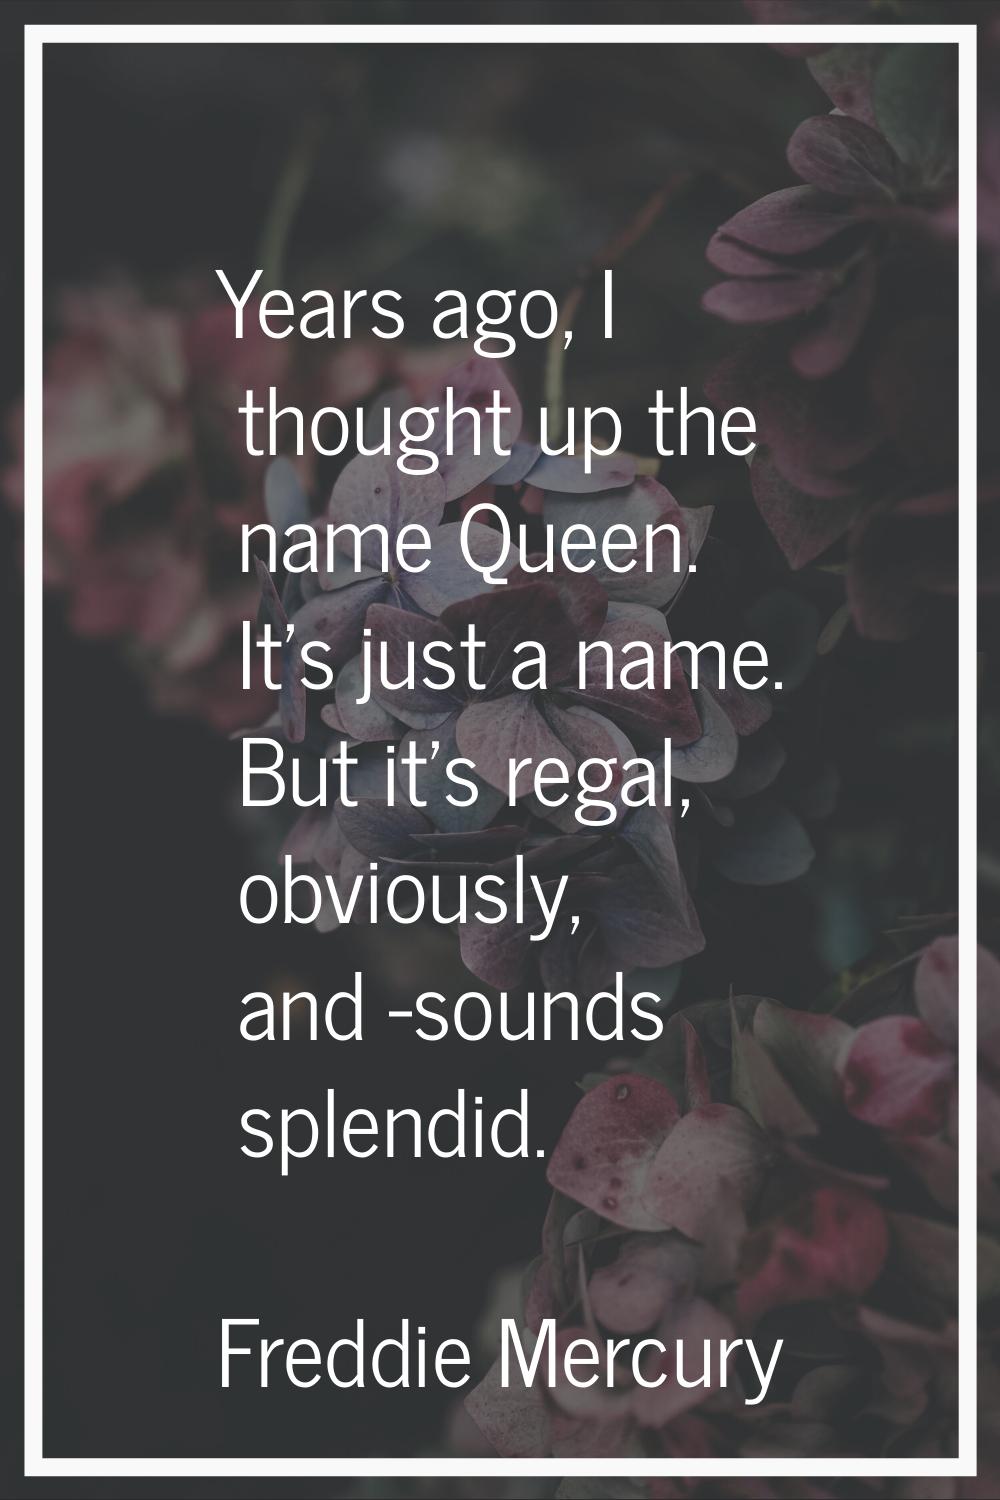 Years ago, I thought up the name Queen. It's just a name. But it's regal, obviously, and -sounds sp